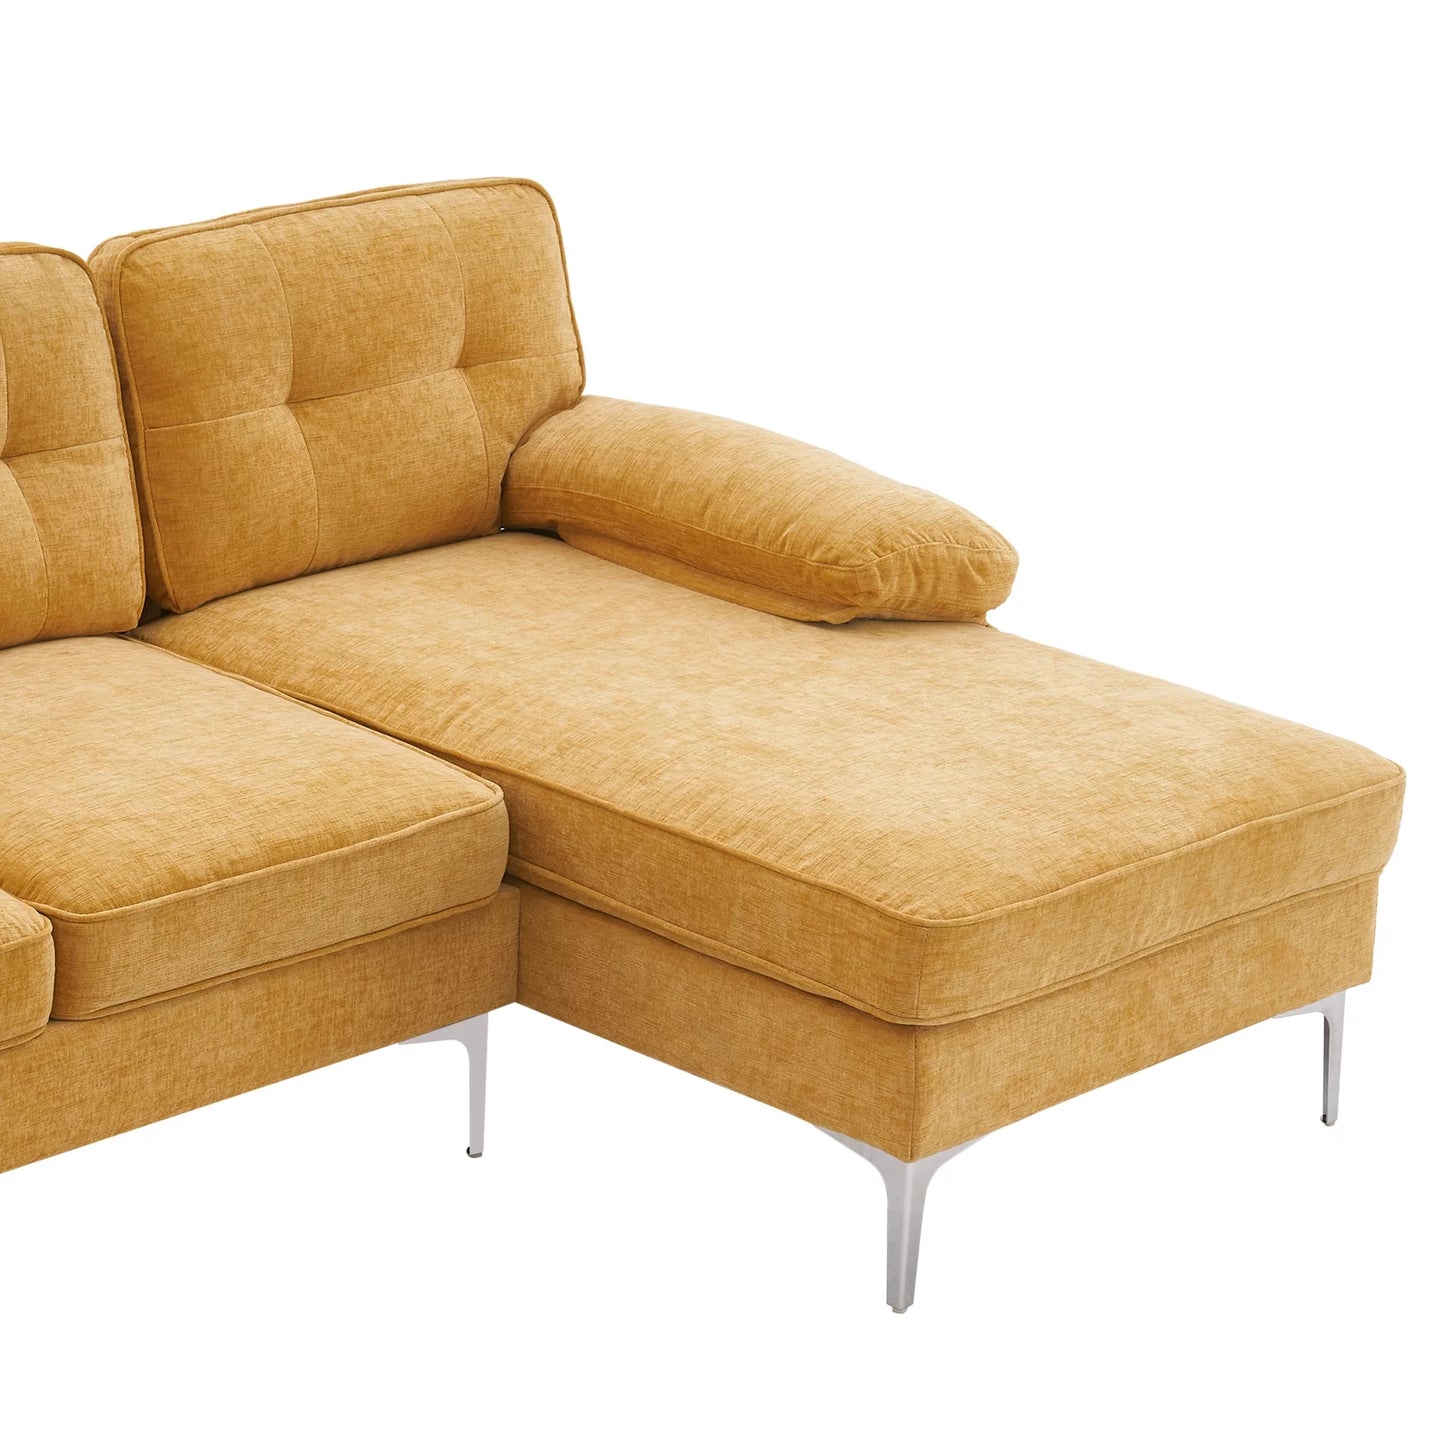 L Shaped Sectional Sofa, 83" Chenille Fabric Upholstered Tufted Couch, 3 Seats Wide Chaise Lounge for Living Room Yellow - Design By Technique